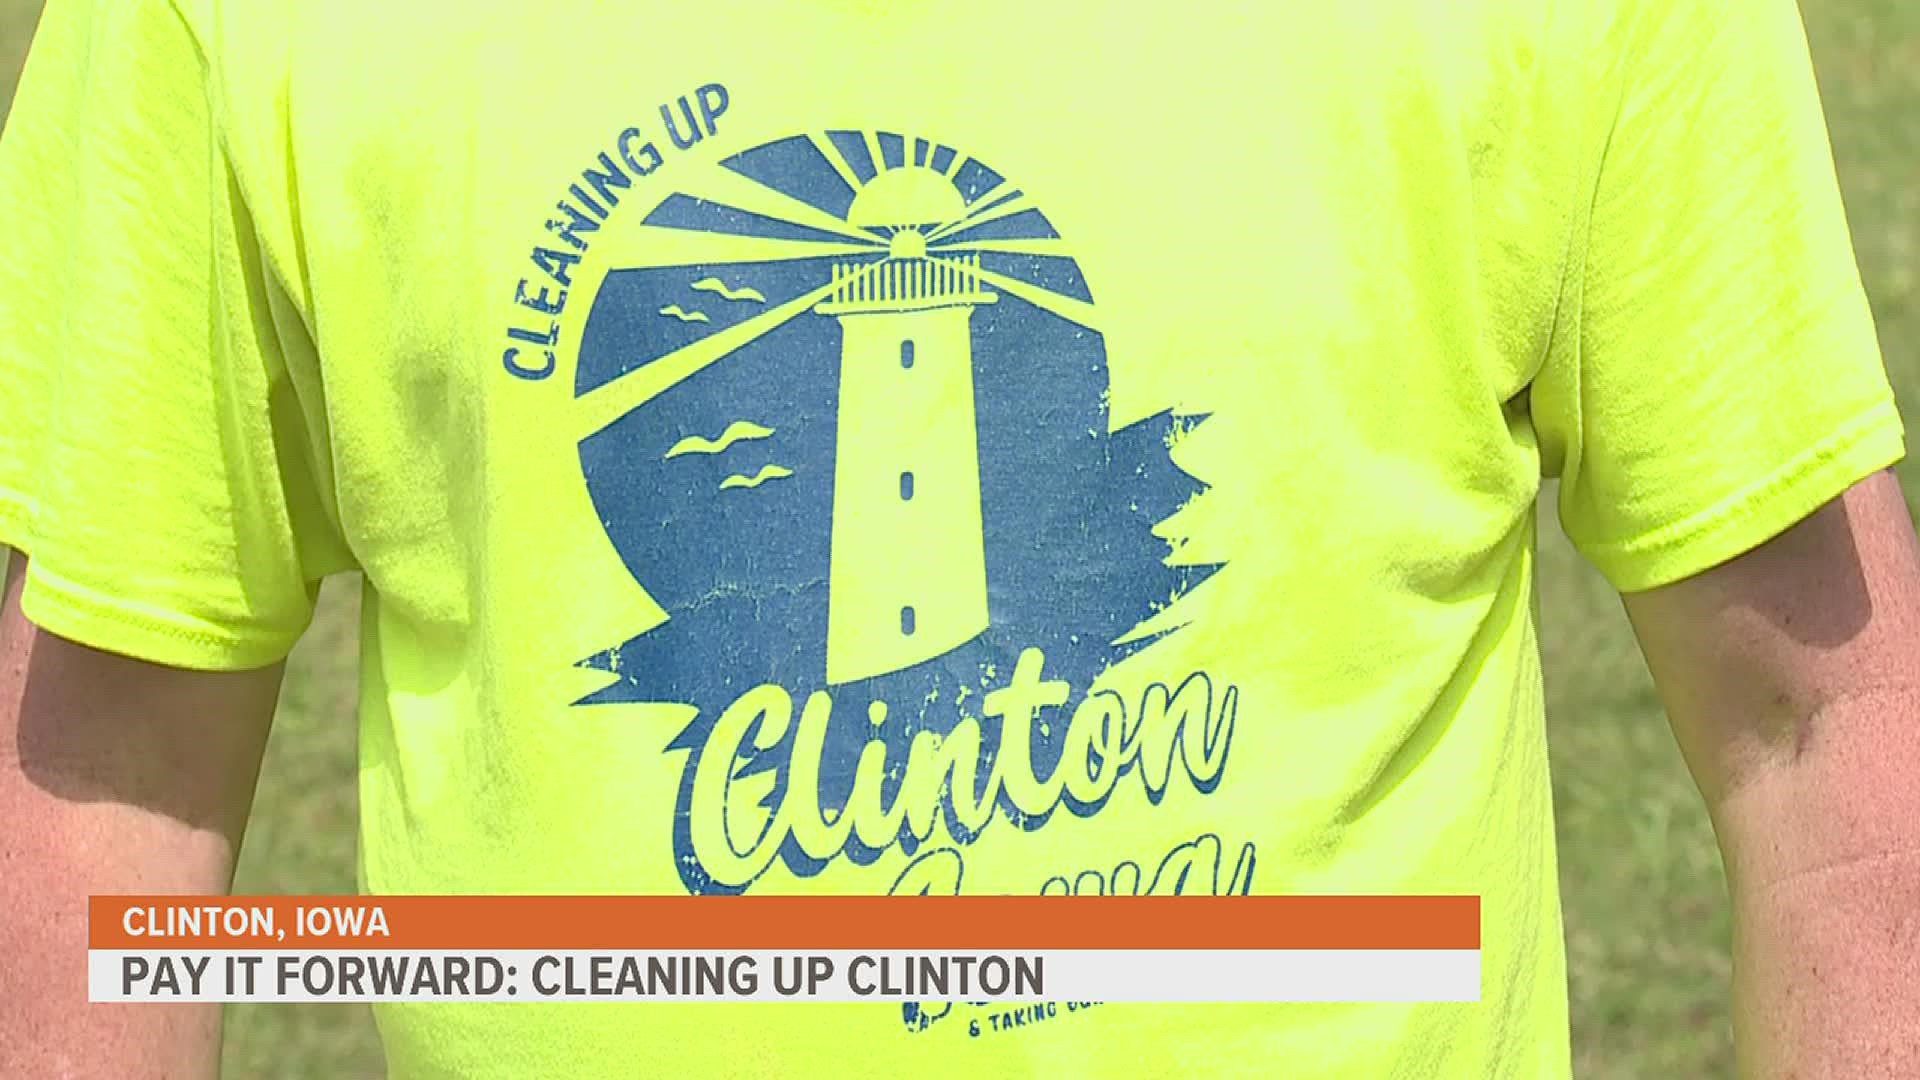 A Clinton woman started a group called "Cleaning up Clinton" and helps remove trash from around town. Her incredible work has earned her the Pay It Forward Award.